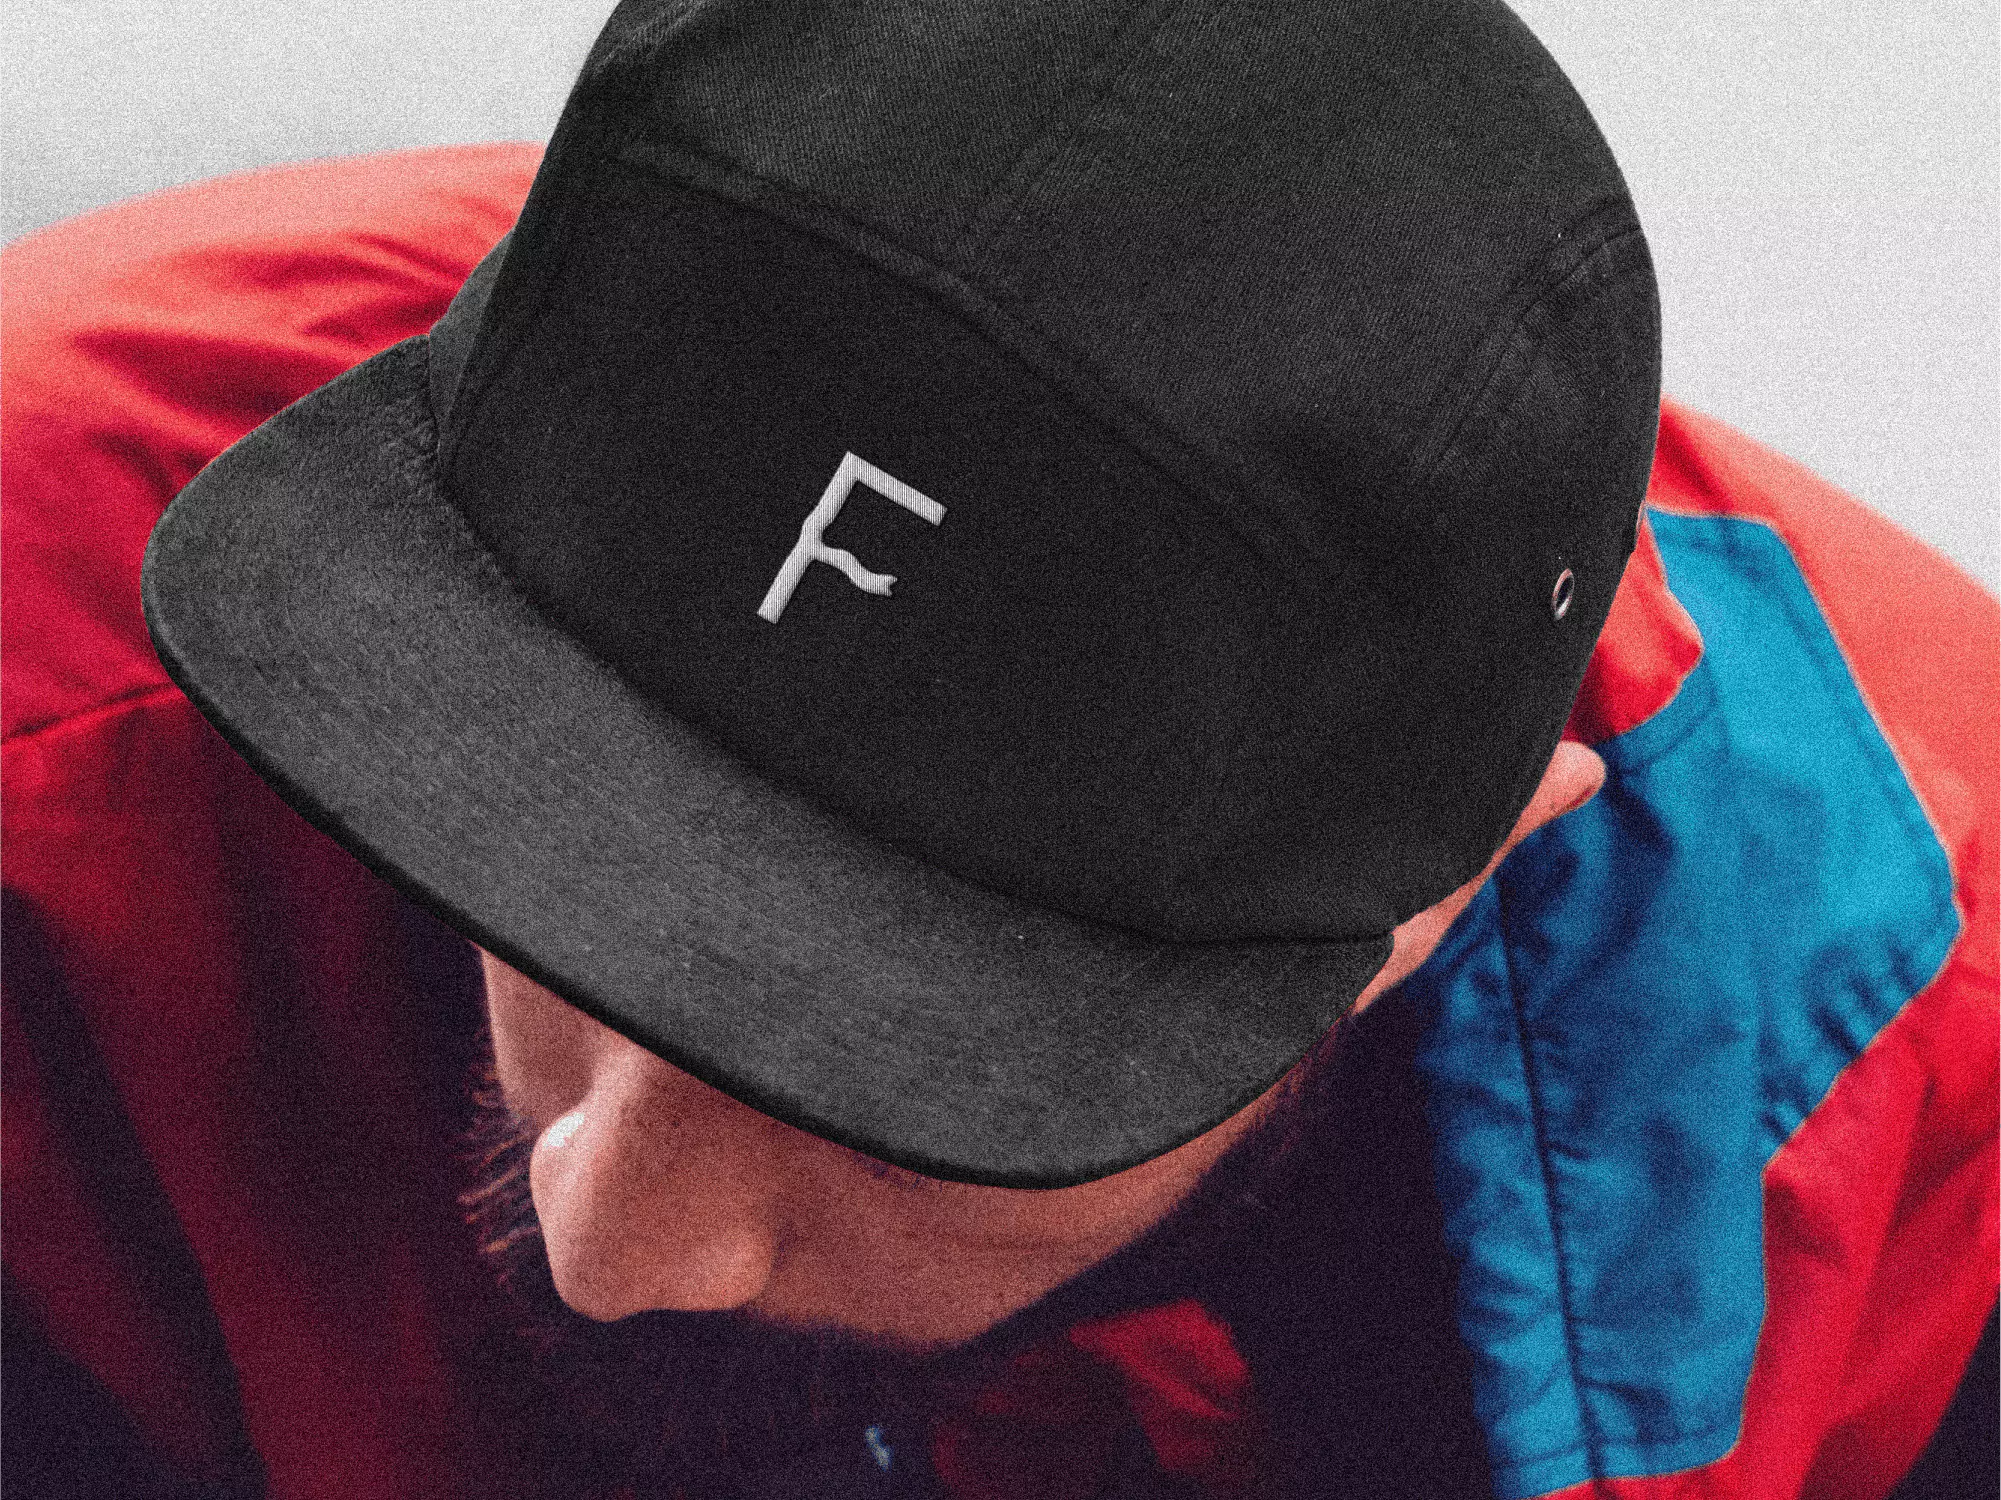 Visual Identity for Frequenhz - Lettermark in a Black Cap